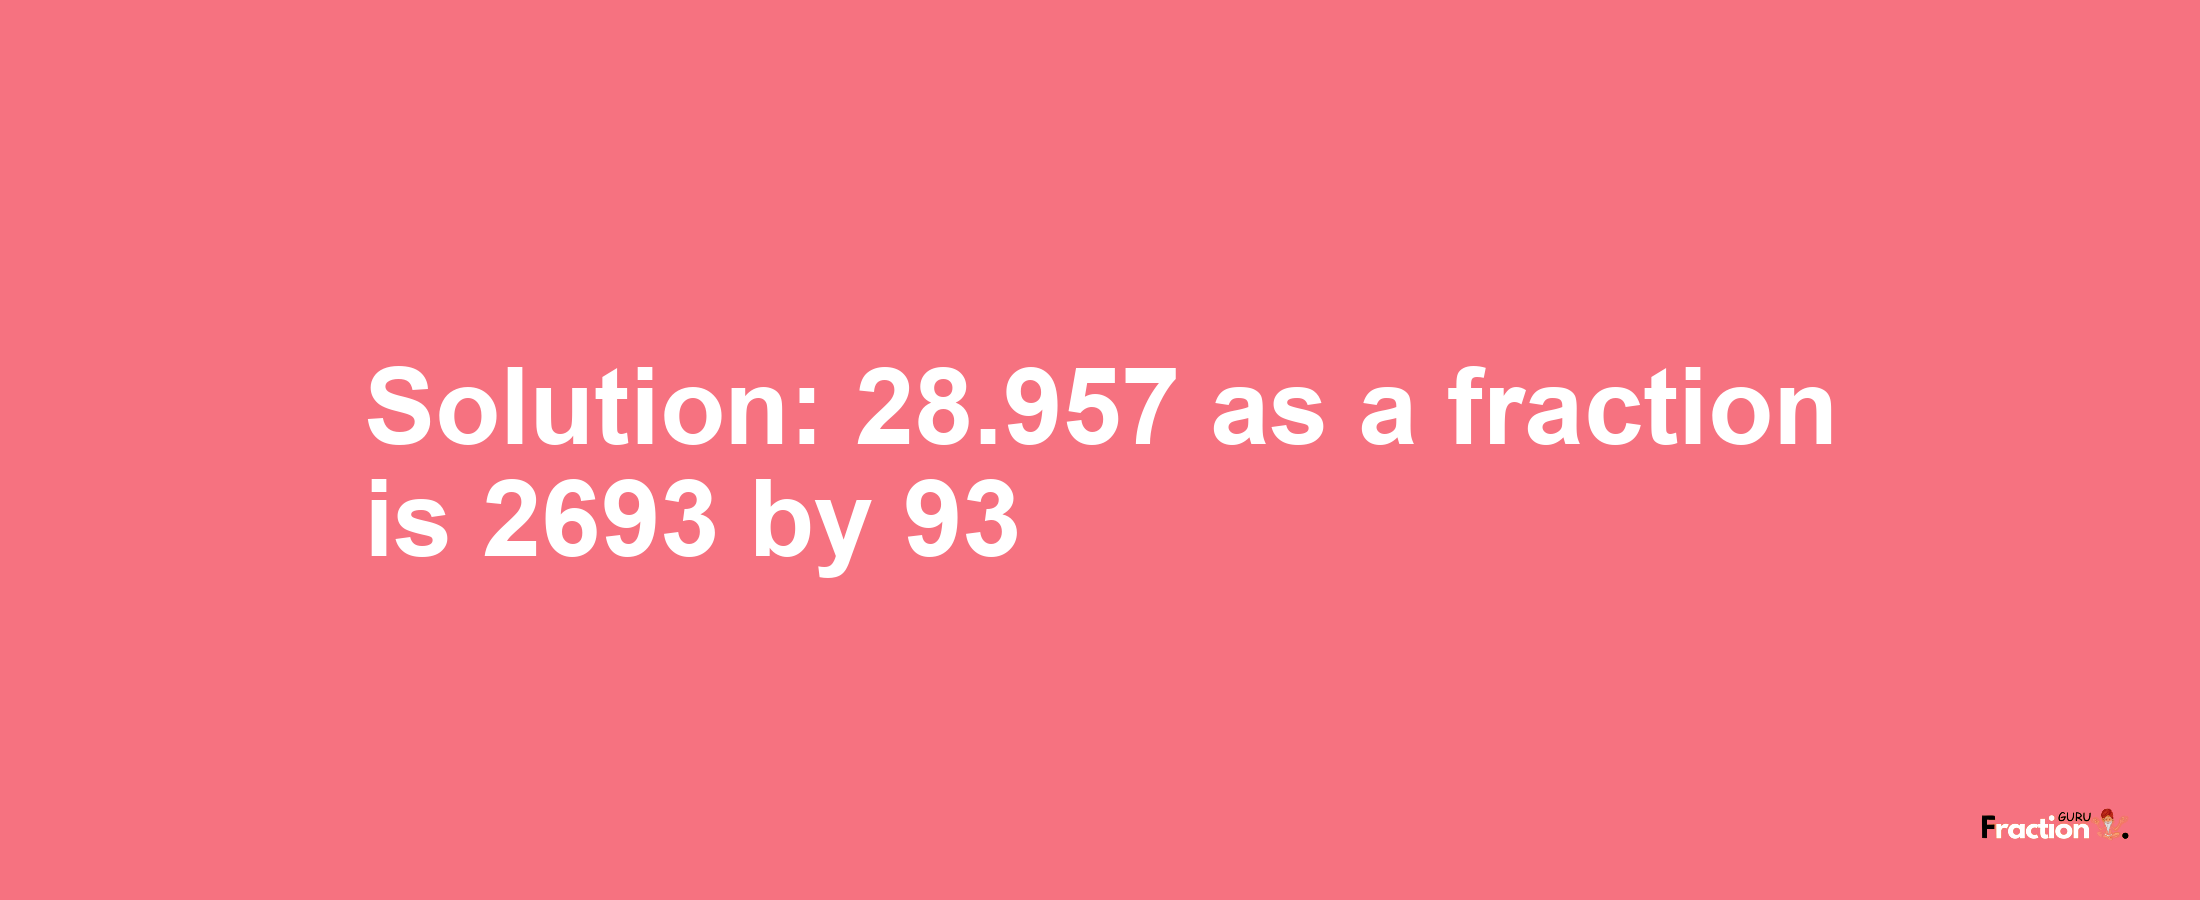 Solution:28.957 as a fraction is 2693/93